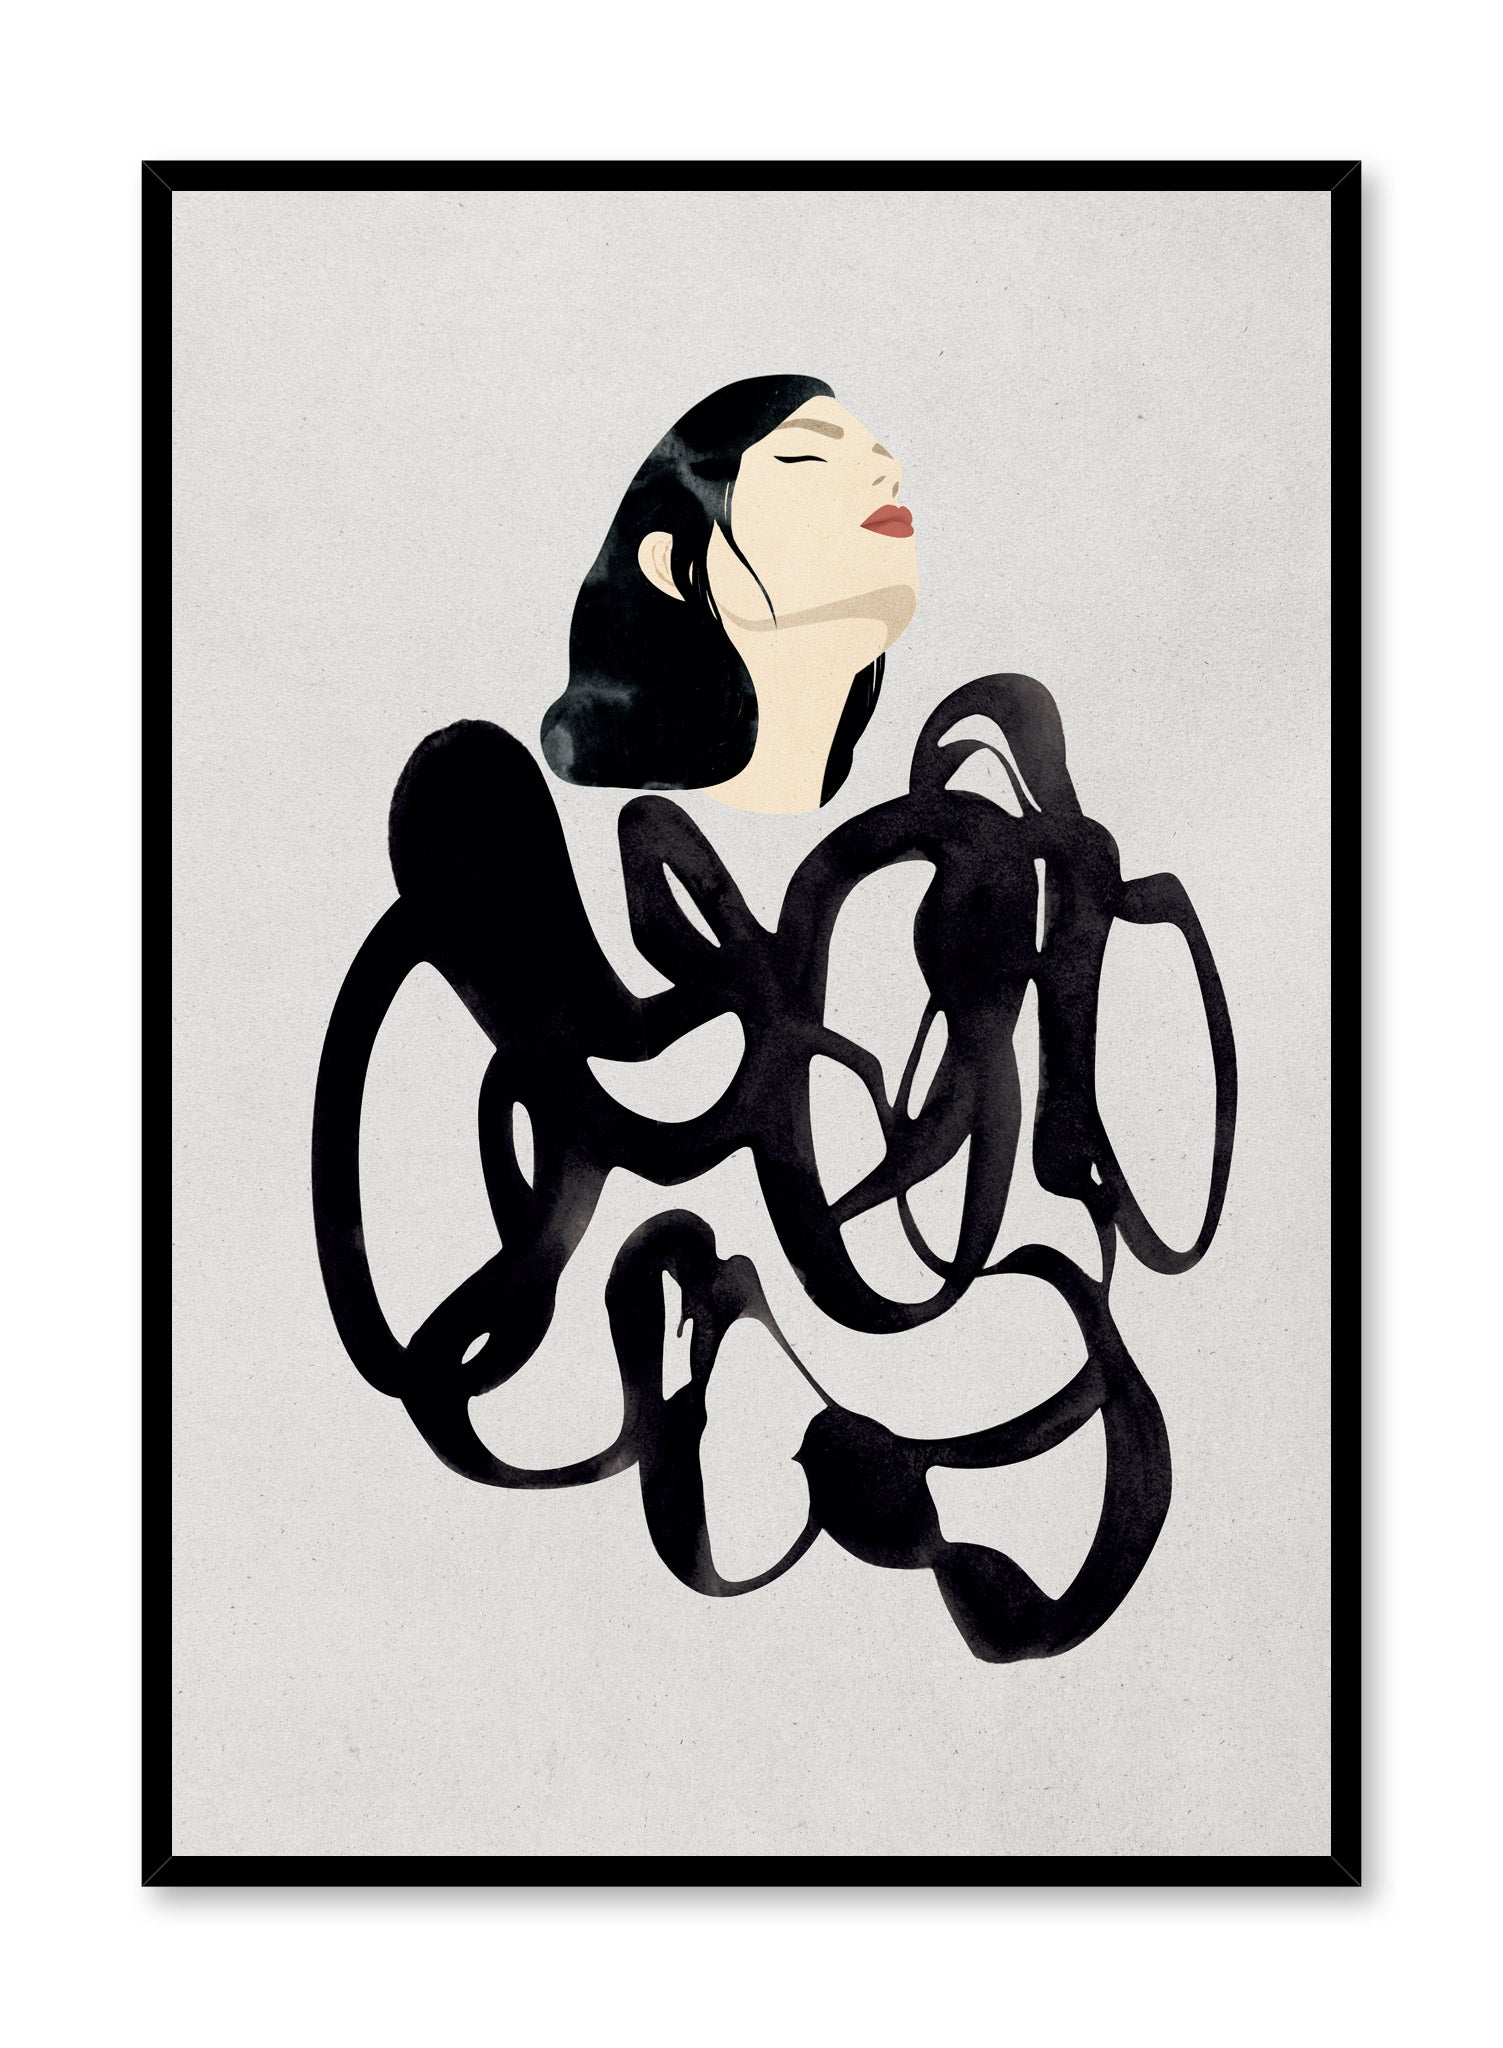 'Overwhelmed' is a fashion illustration poster from the Venus collection.